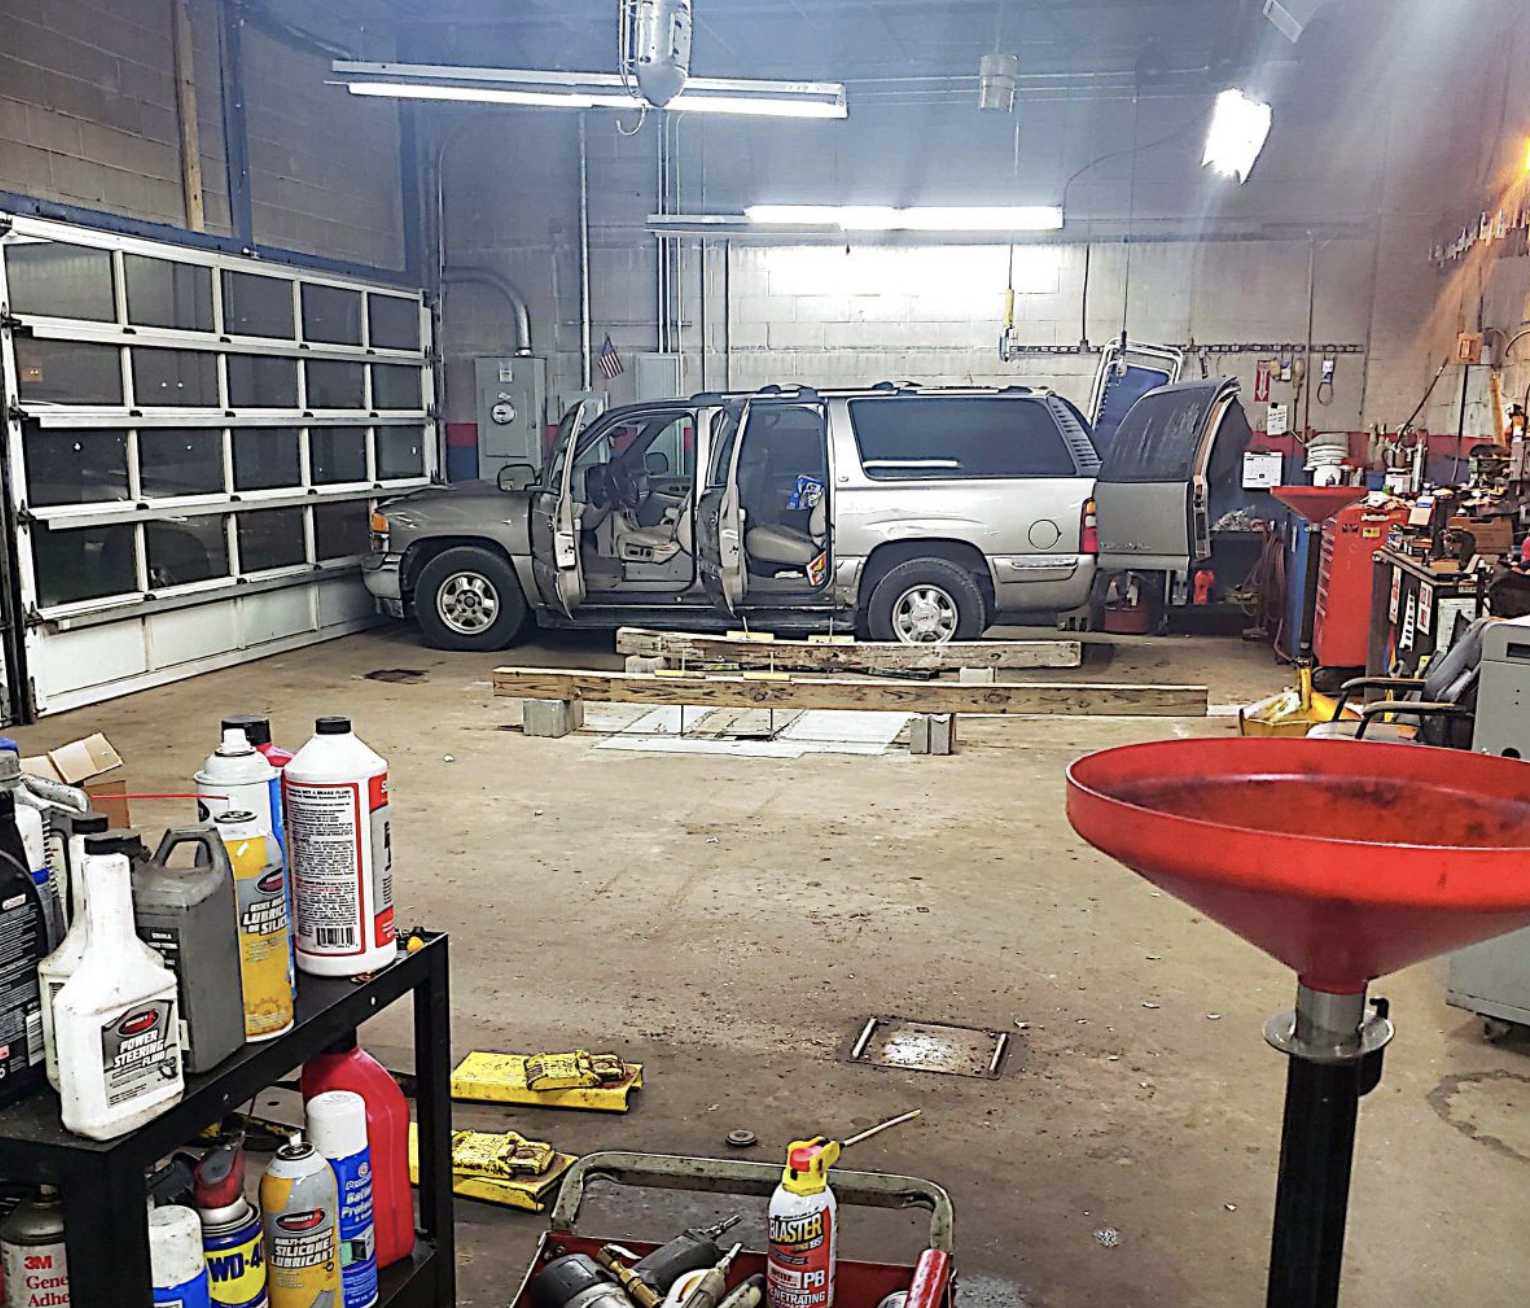 Well Reviewed Auto Repair Shop For Sale in NY 